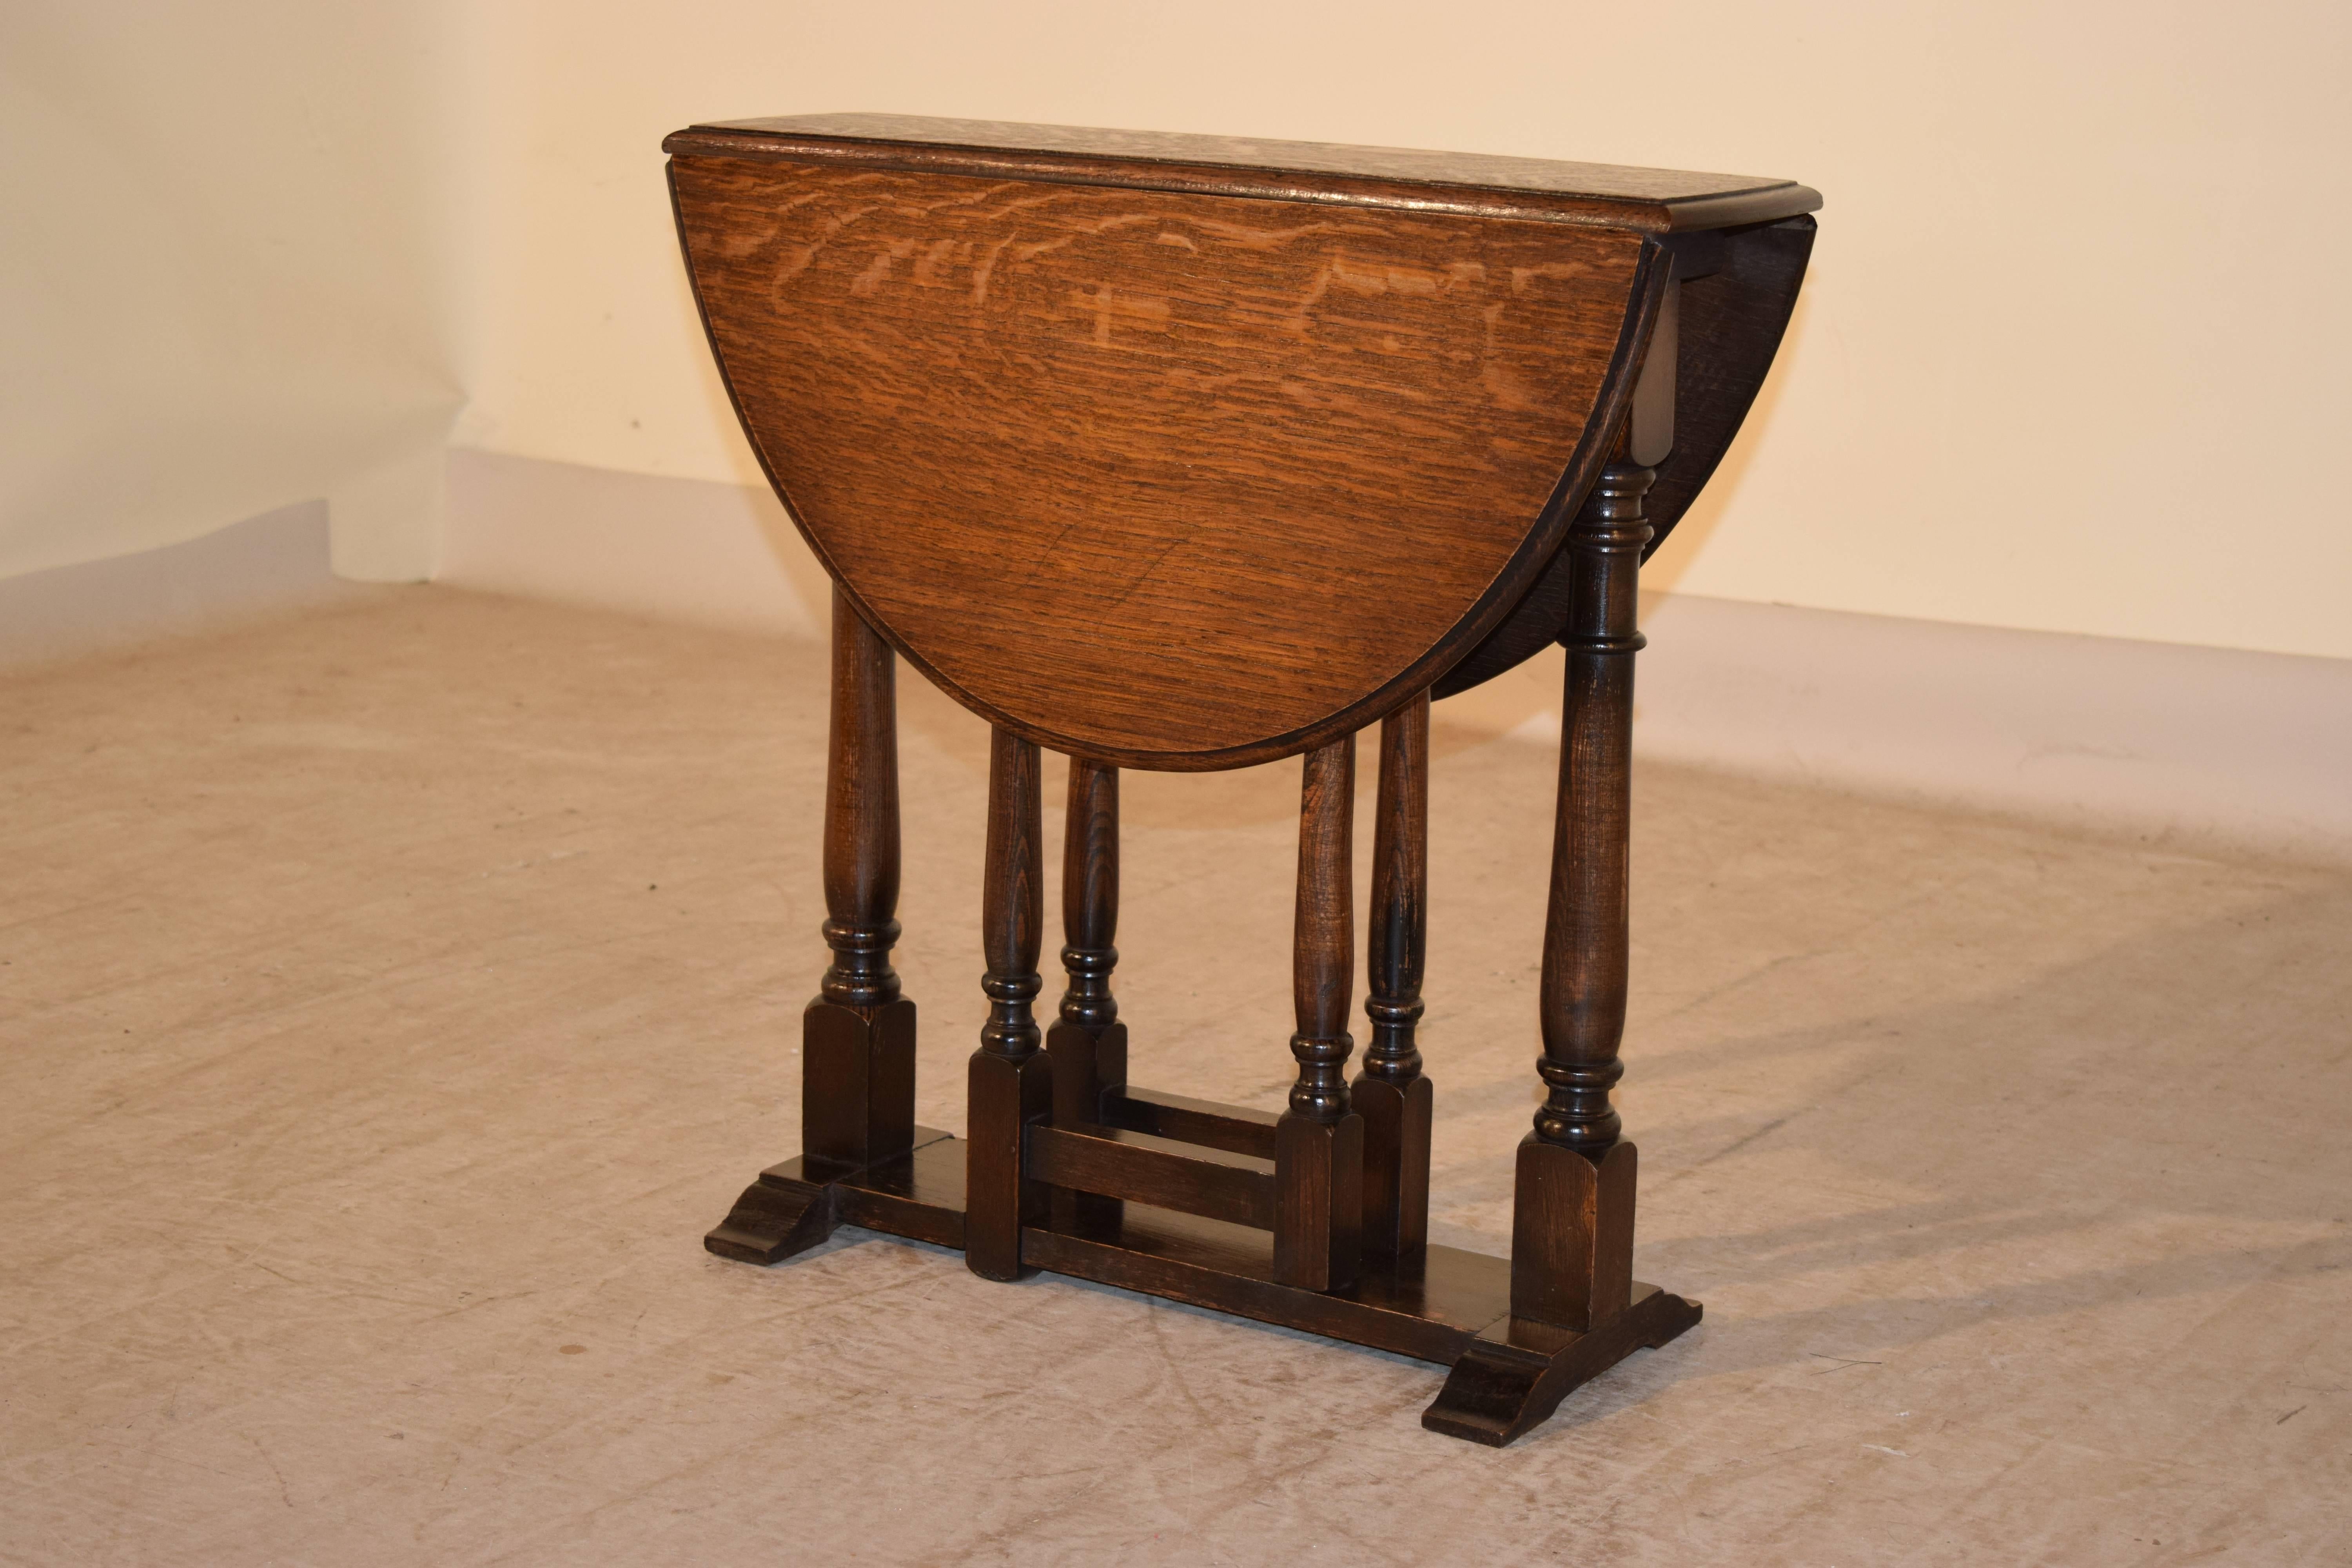 English oak gateleg table with a beveled edge around the top, following down to a simple apron and a trestle base with simple hand-turned legs, circa 1900. The top open measures 29.5